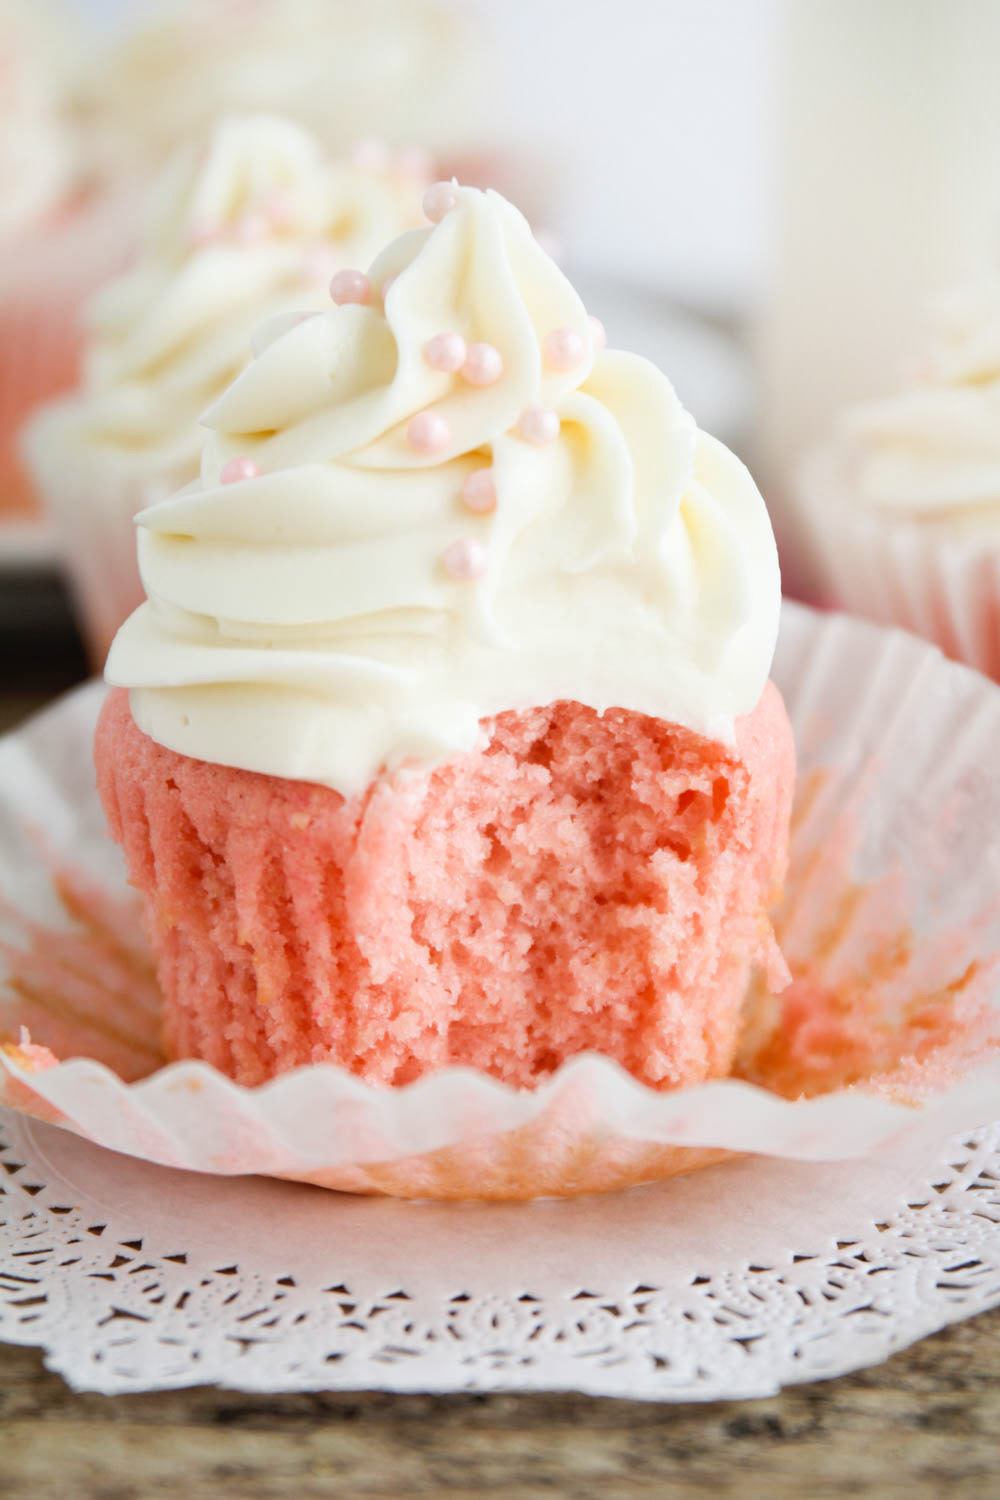 15 beautiful and deliciously sweet Valentine's desserts to share with your sweetheart!